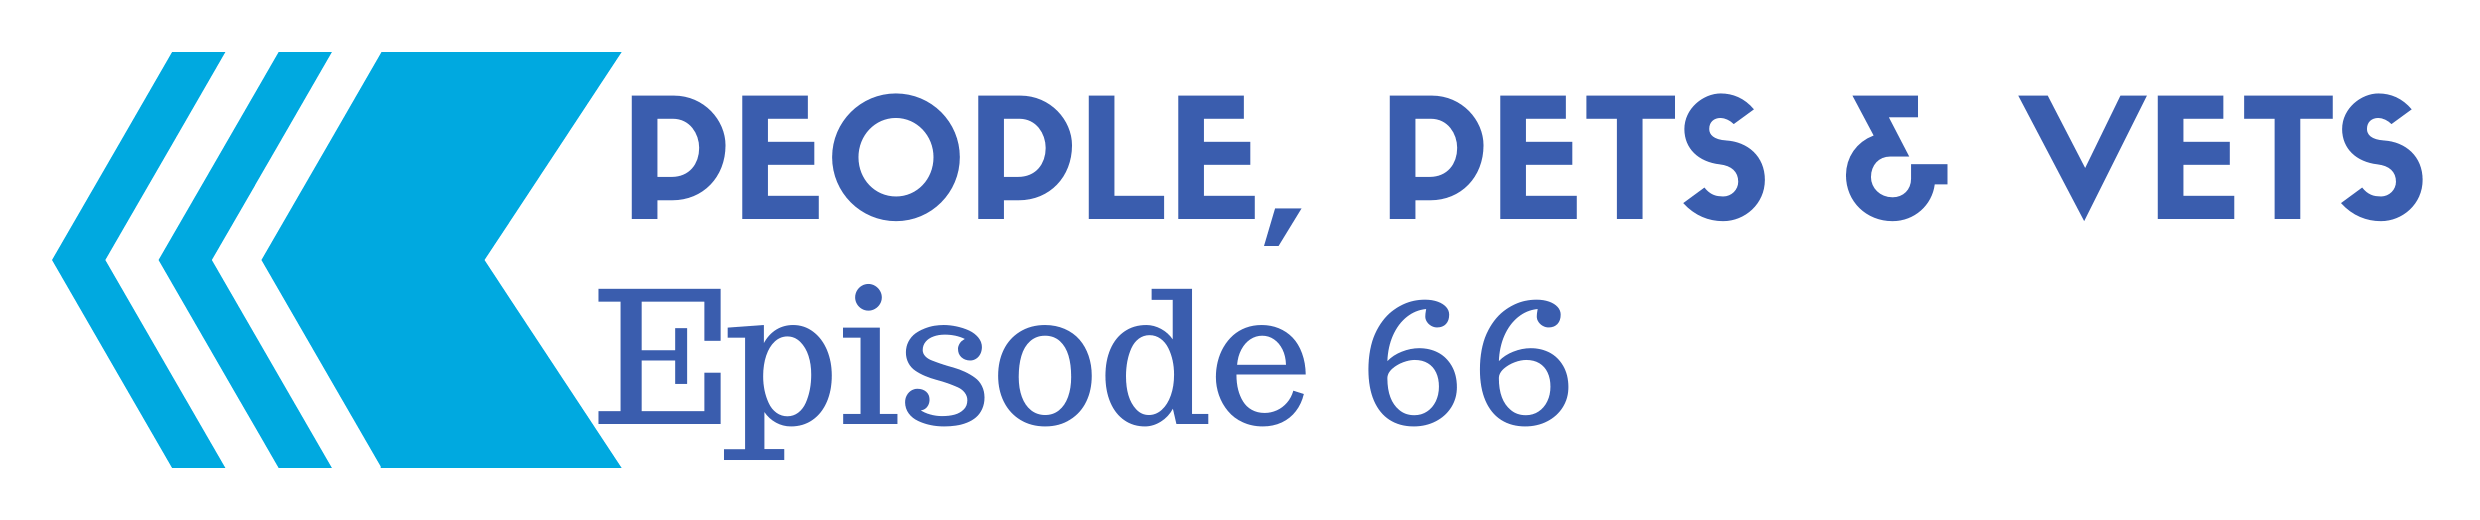 Back to Episode 66